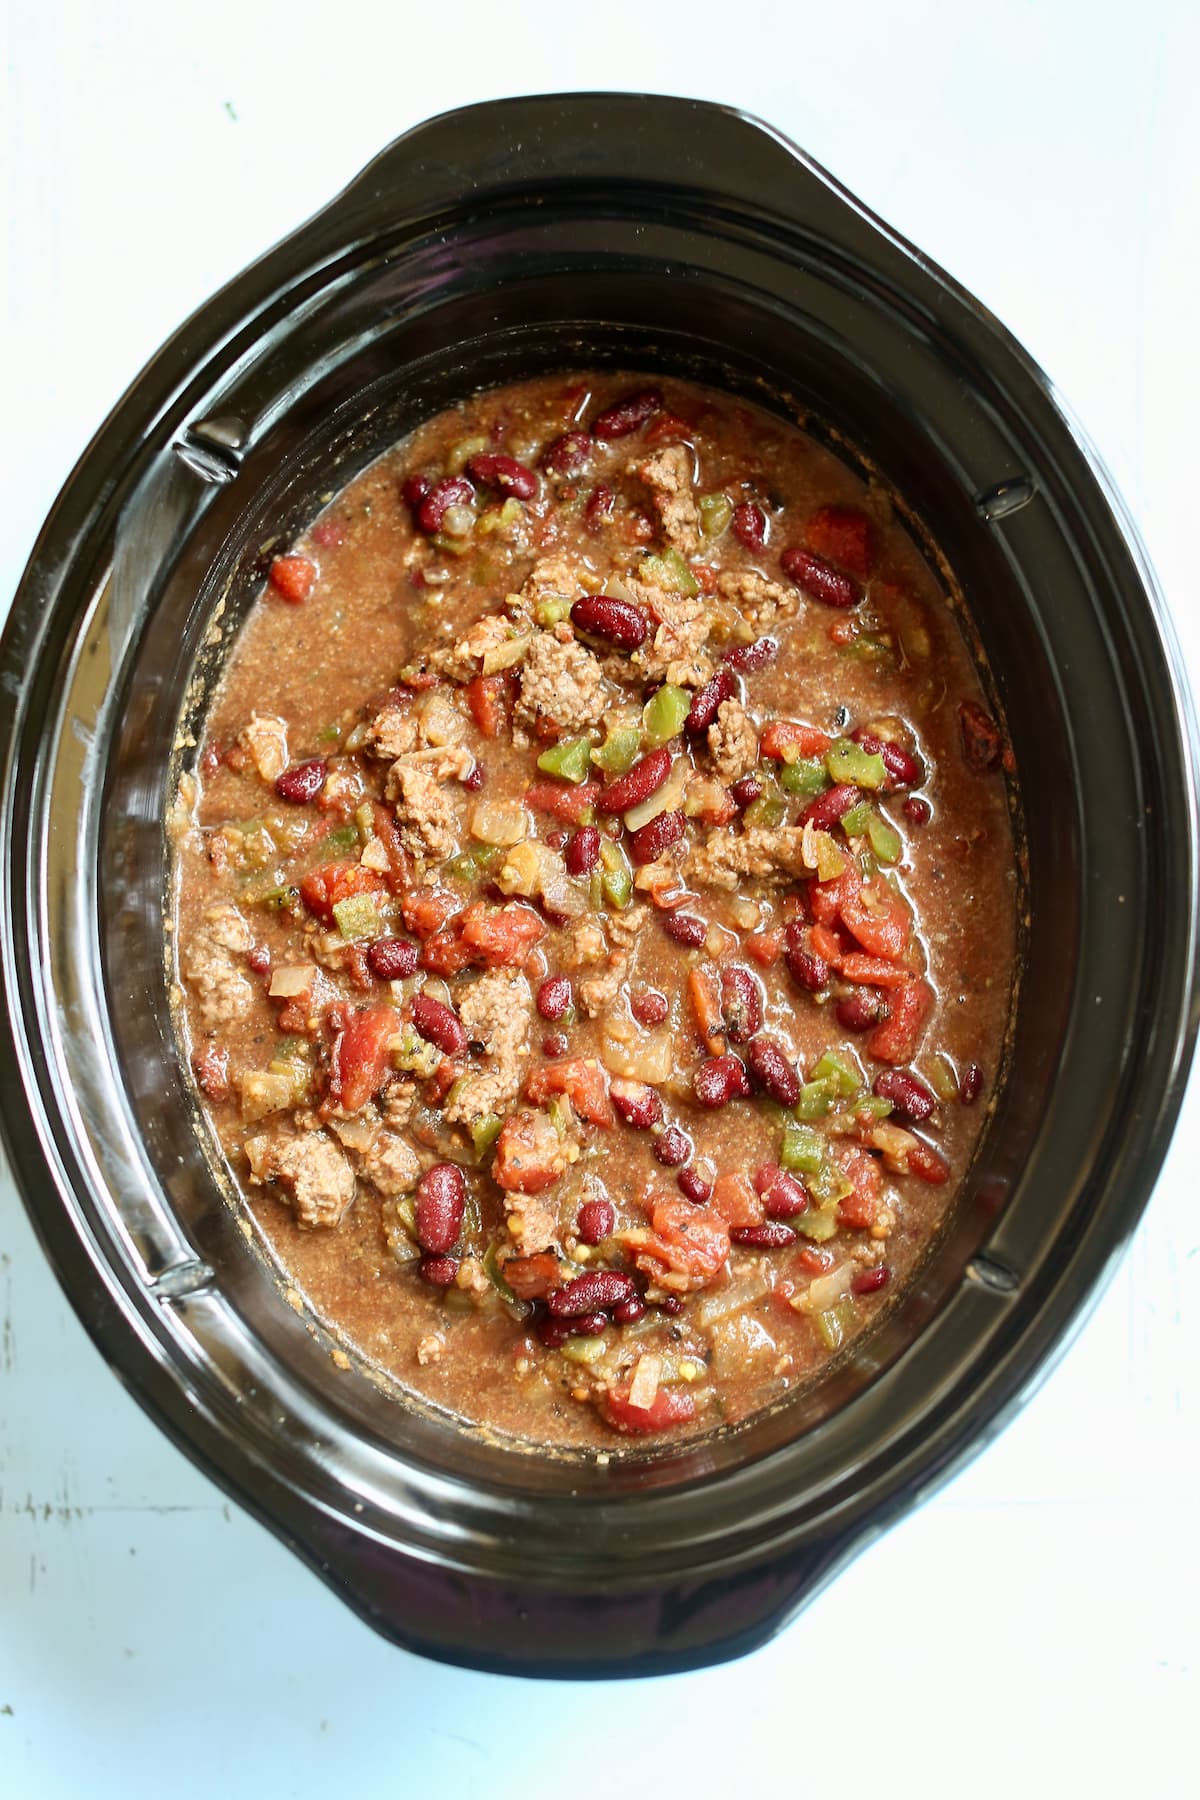 a crock pot vessel with the uncooked irish chili ingredents in it.